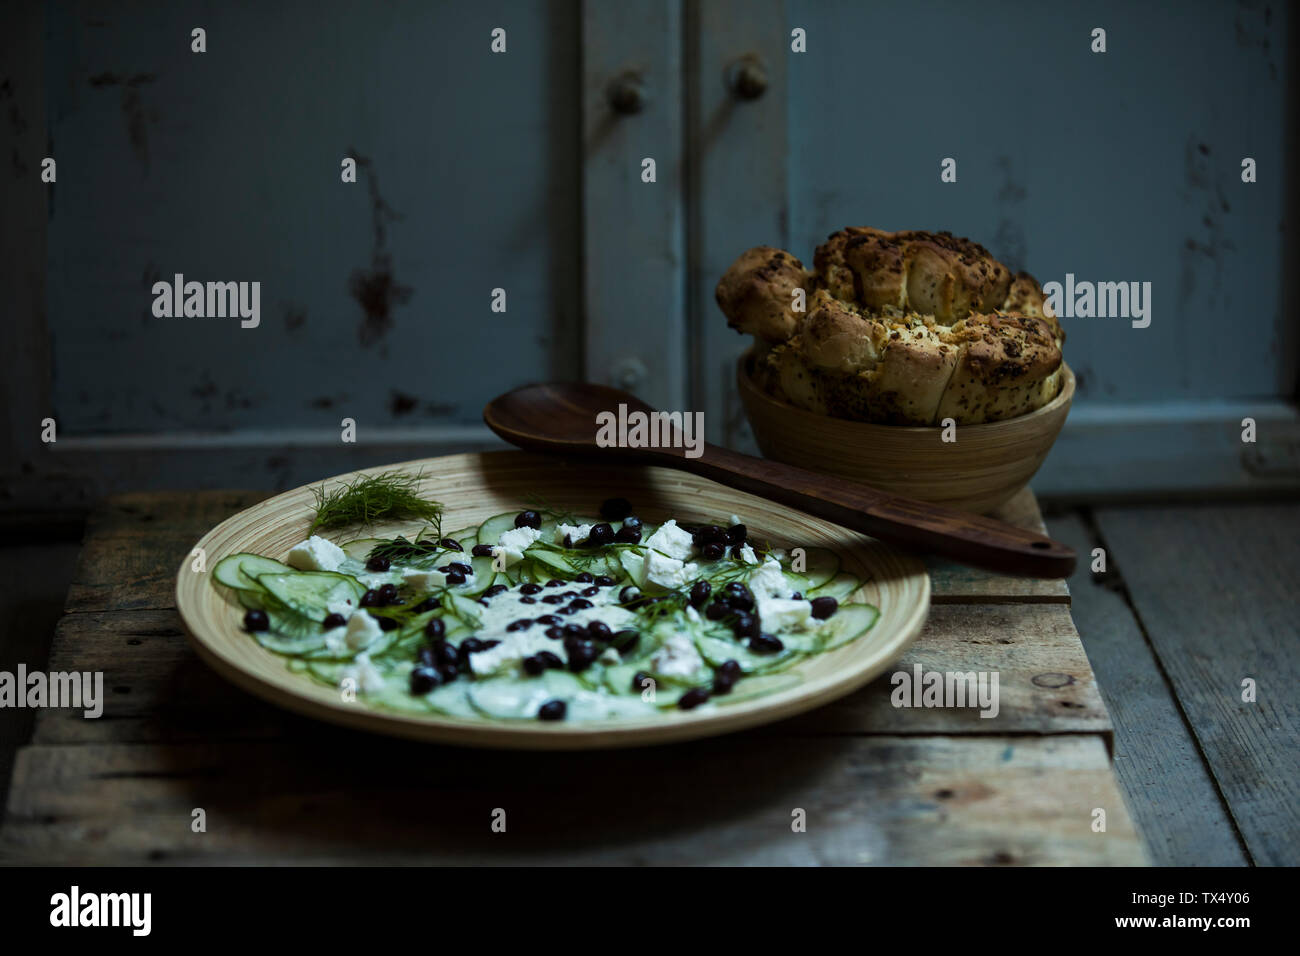 ucumber salad with black beans, sheep cheese, dill and pickled bread Stock Photo